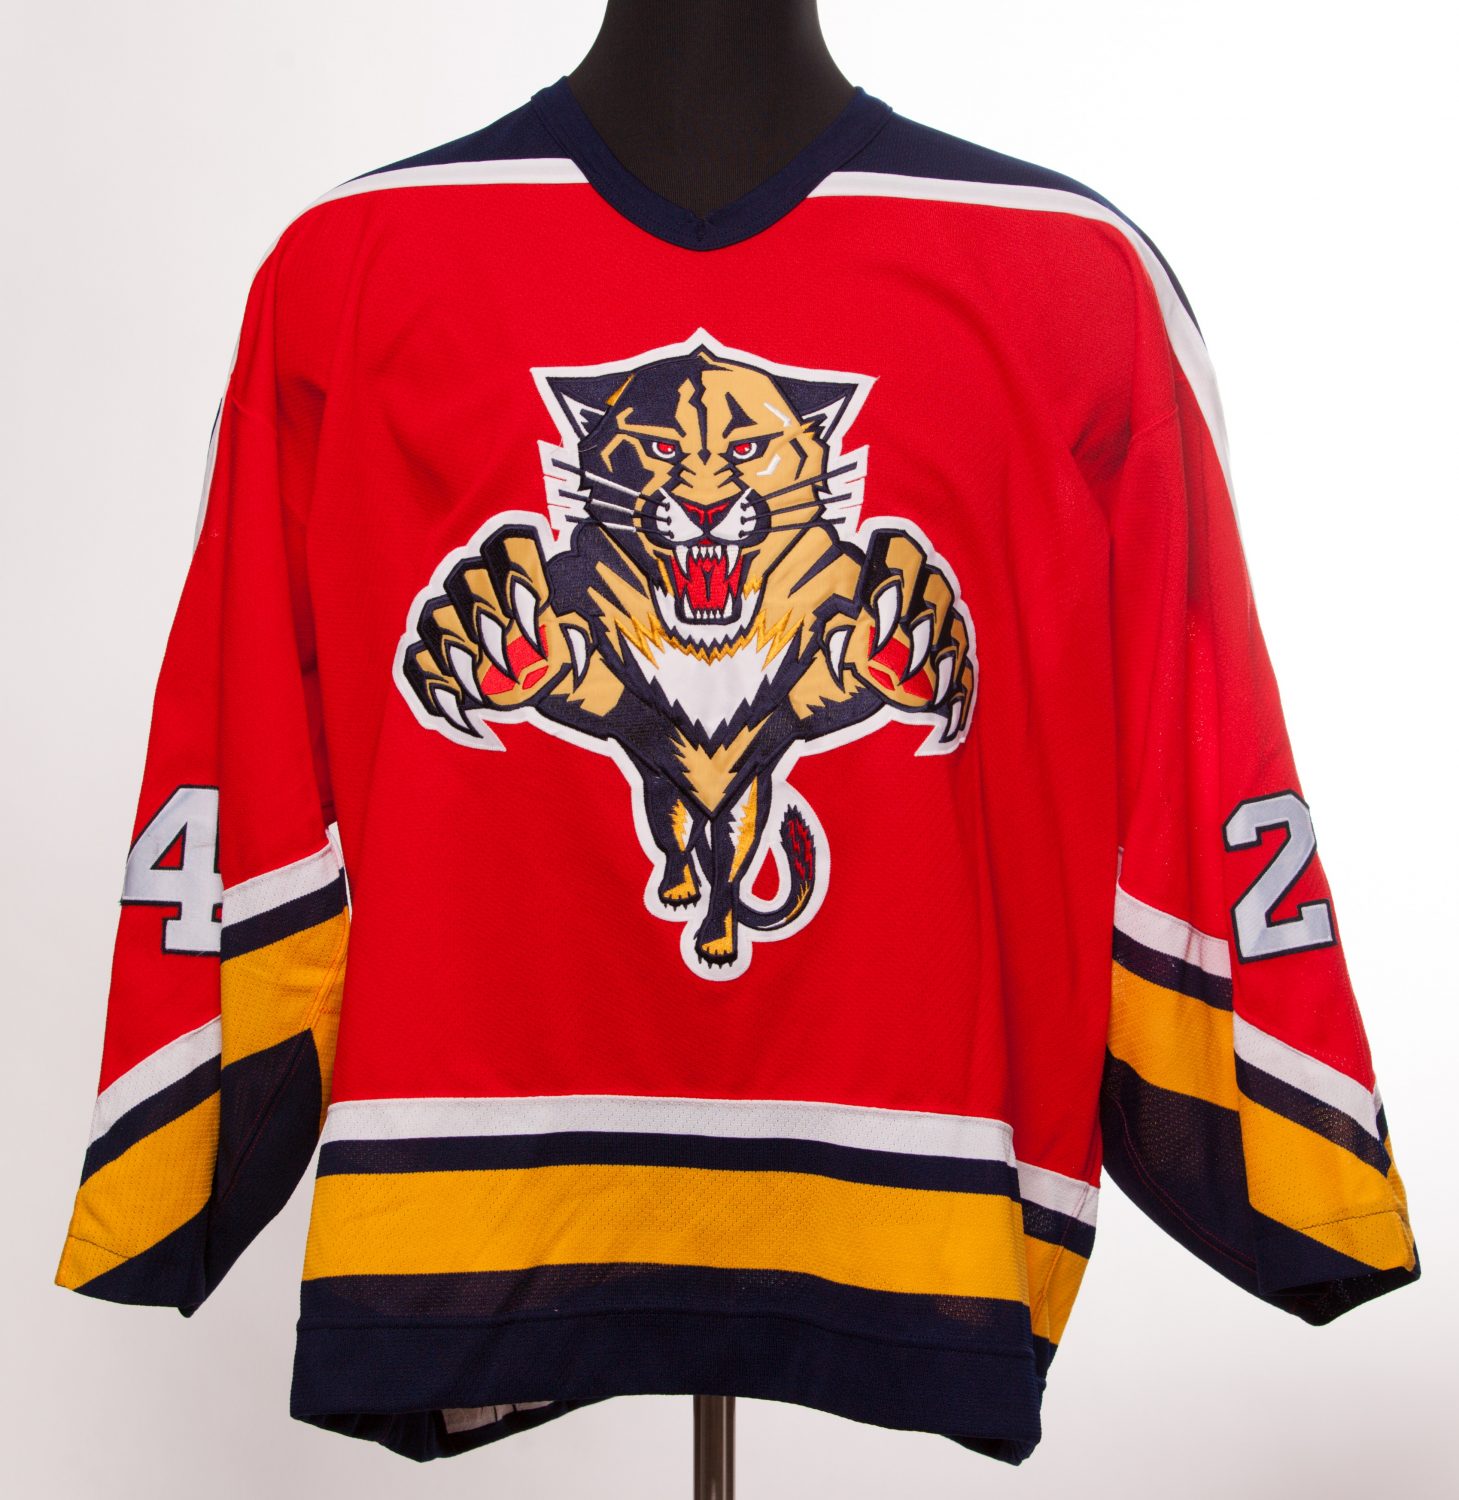 2017-18 Vincent Trocheck Florida Panthers Game Worn Jersey – “MSD